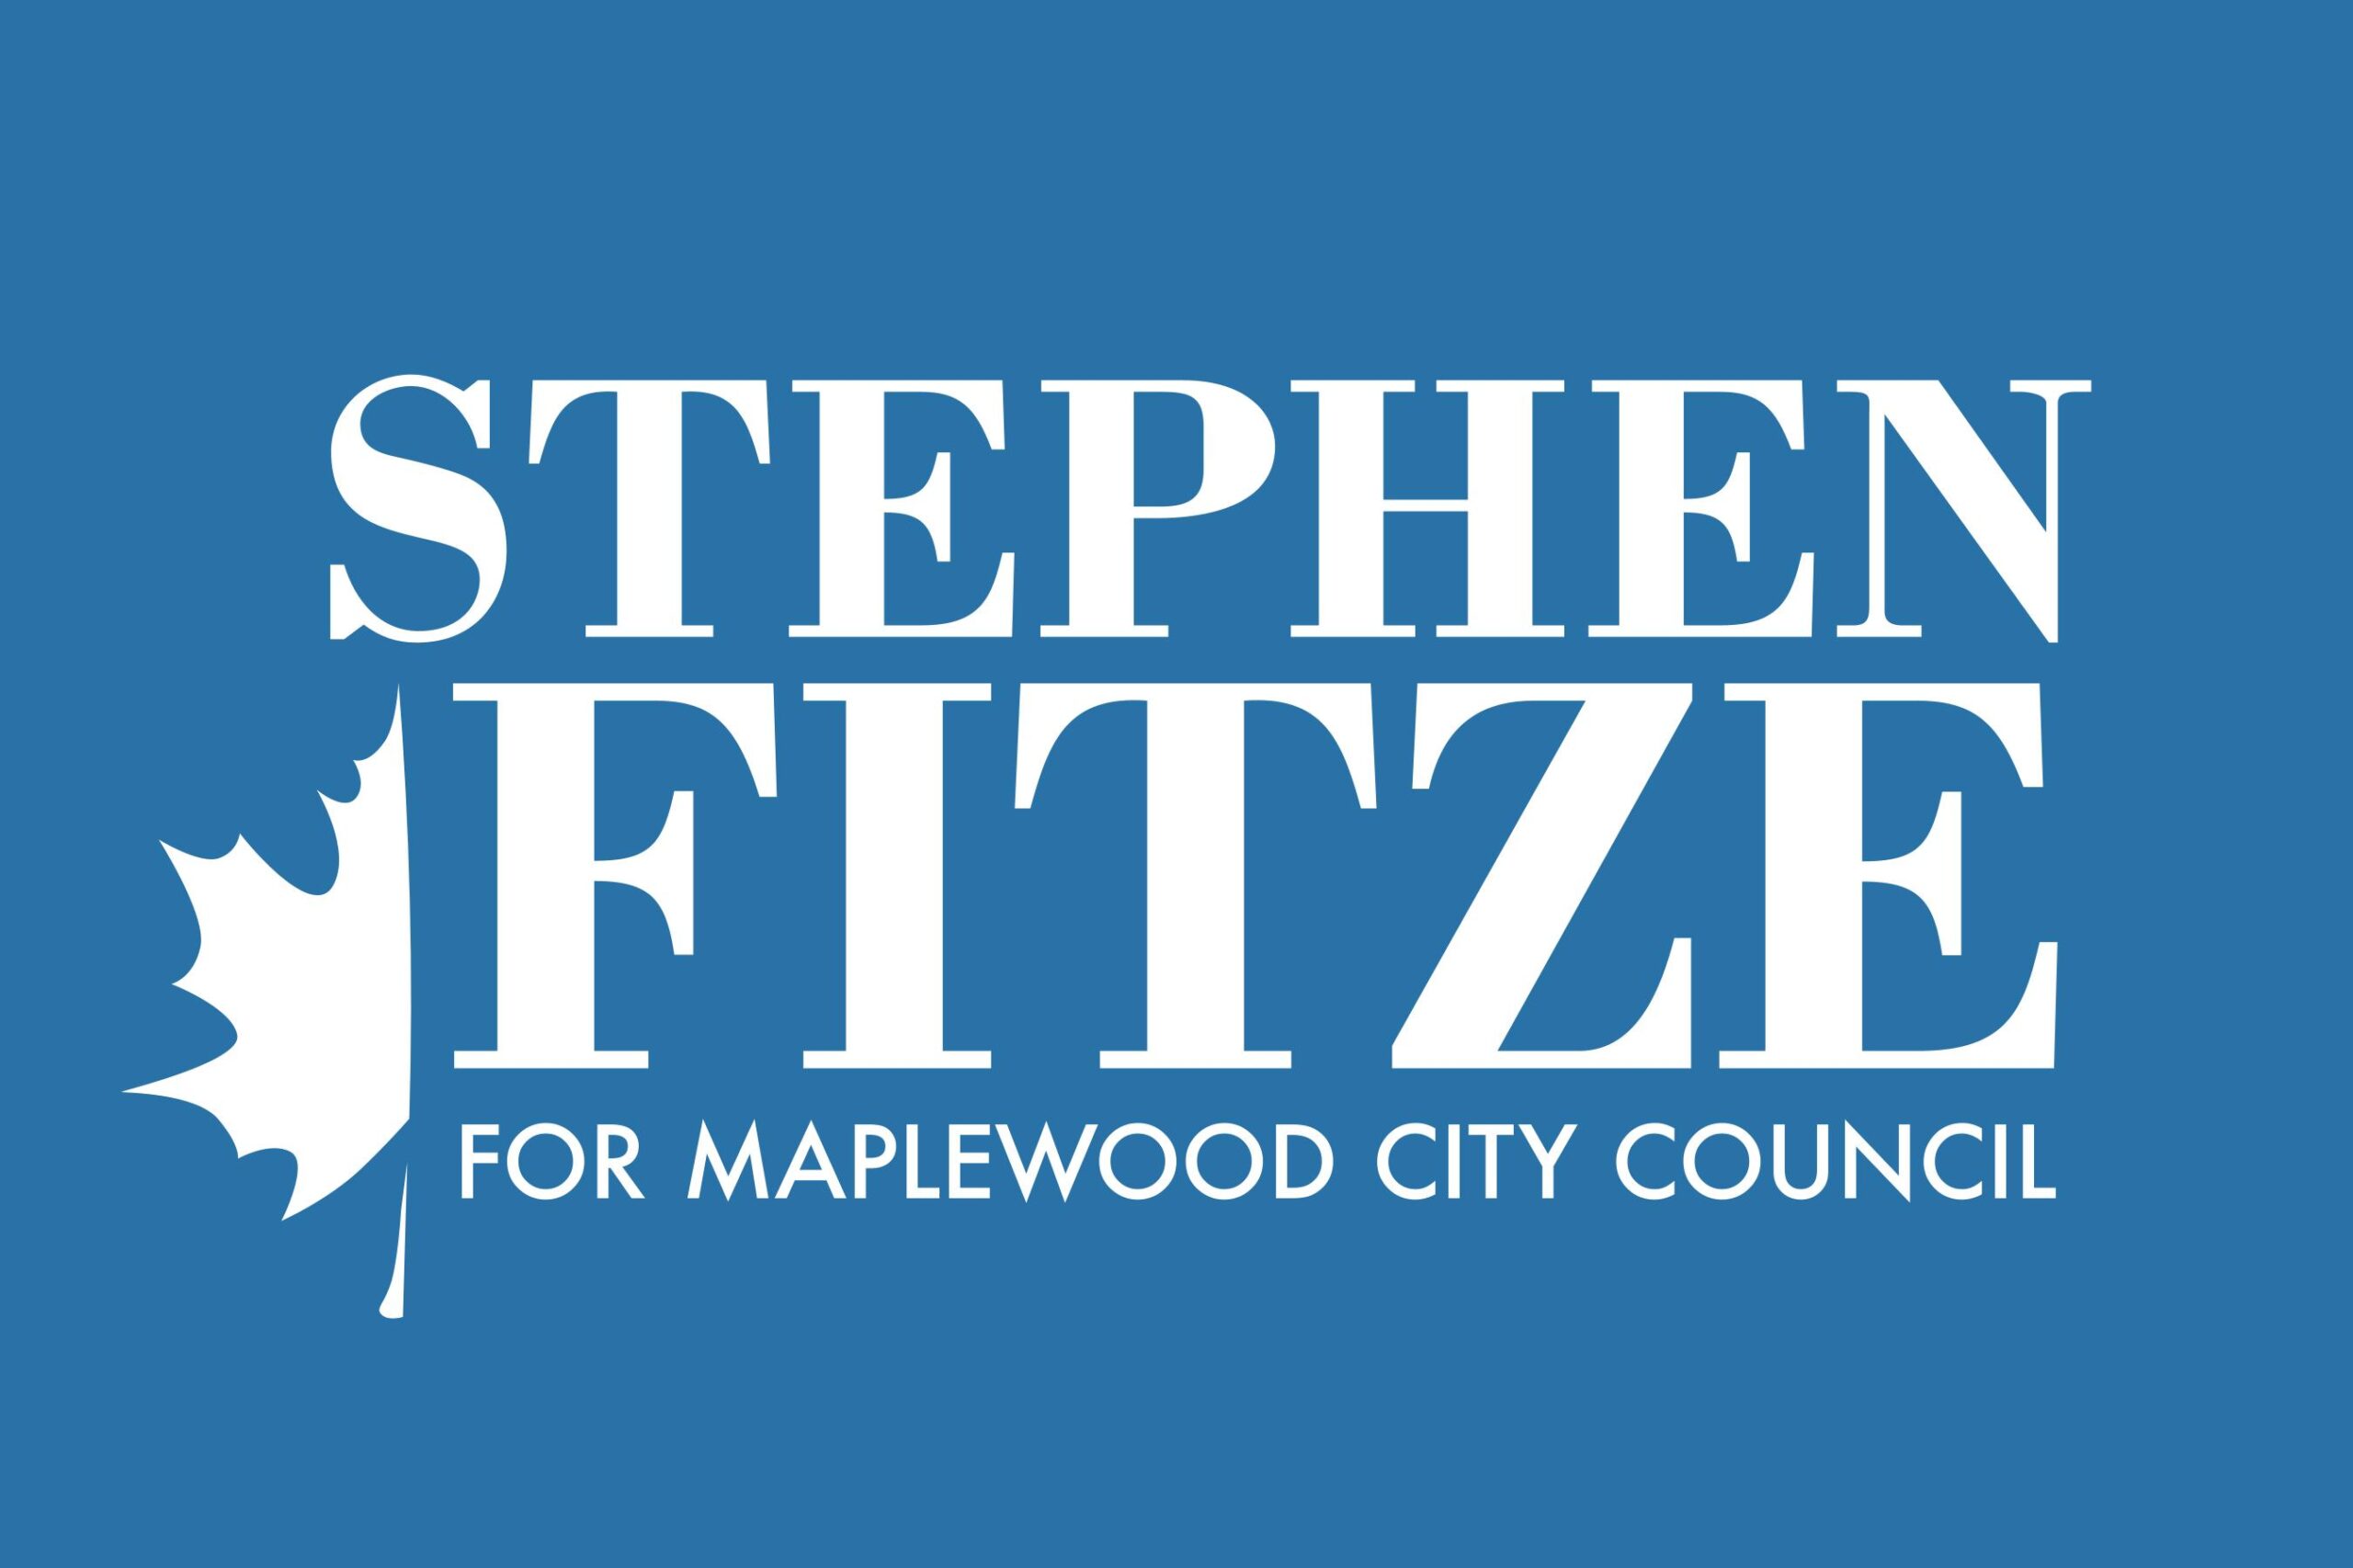 Stephen Fitze for Maplewood